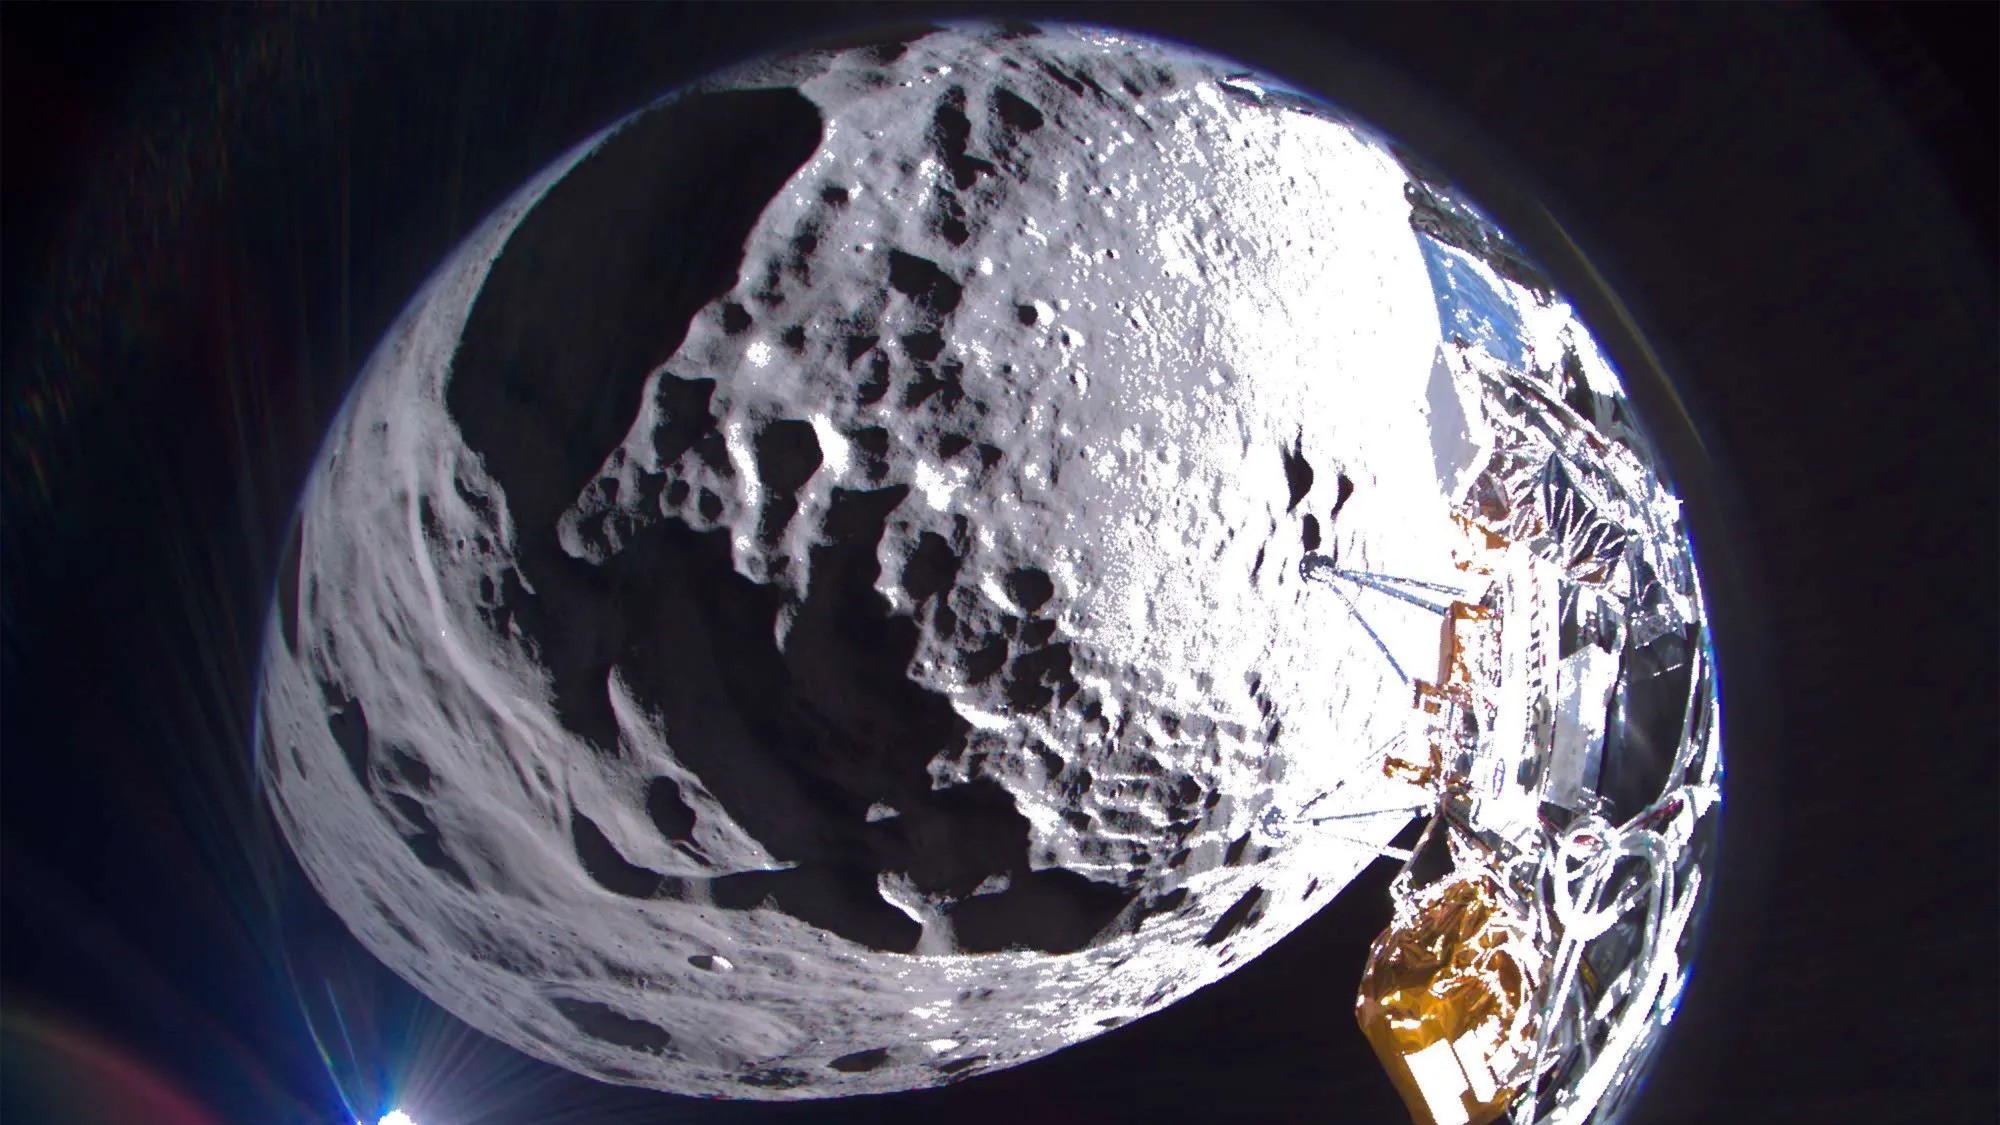 1st US spacecraft on moon in 50 years could be dead by Tuesday after face-plant landing